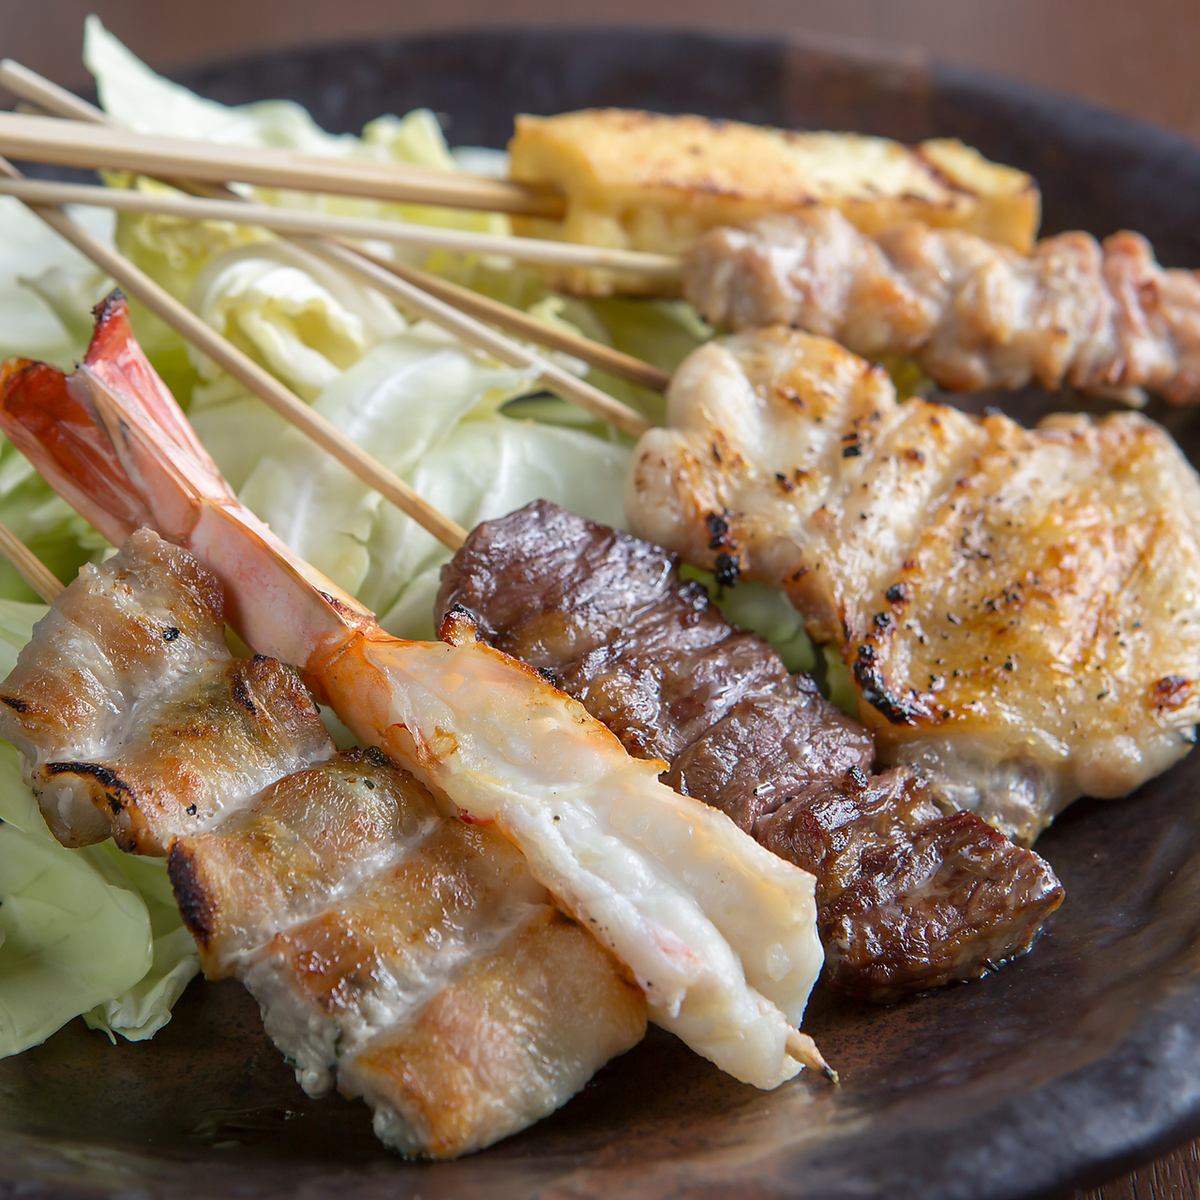 Enjoy our signature skewers! In addition to chicken, we also have pork and beef.